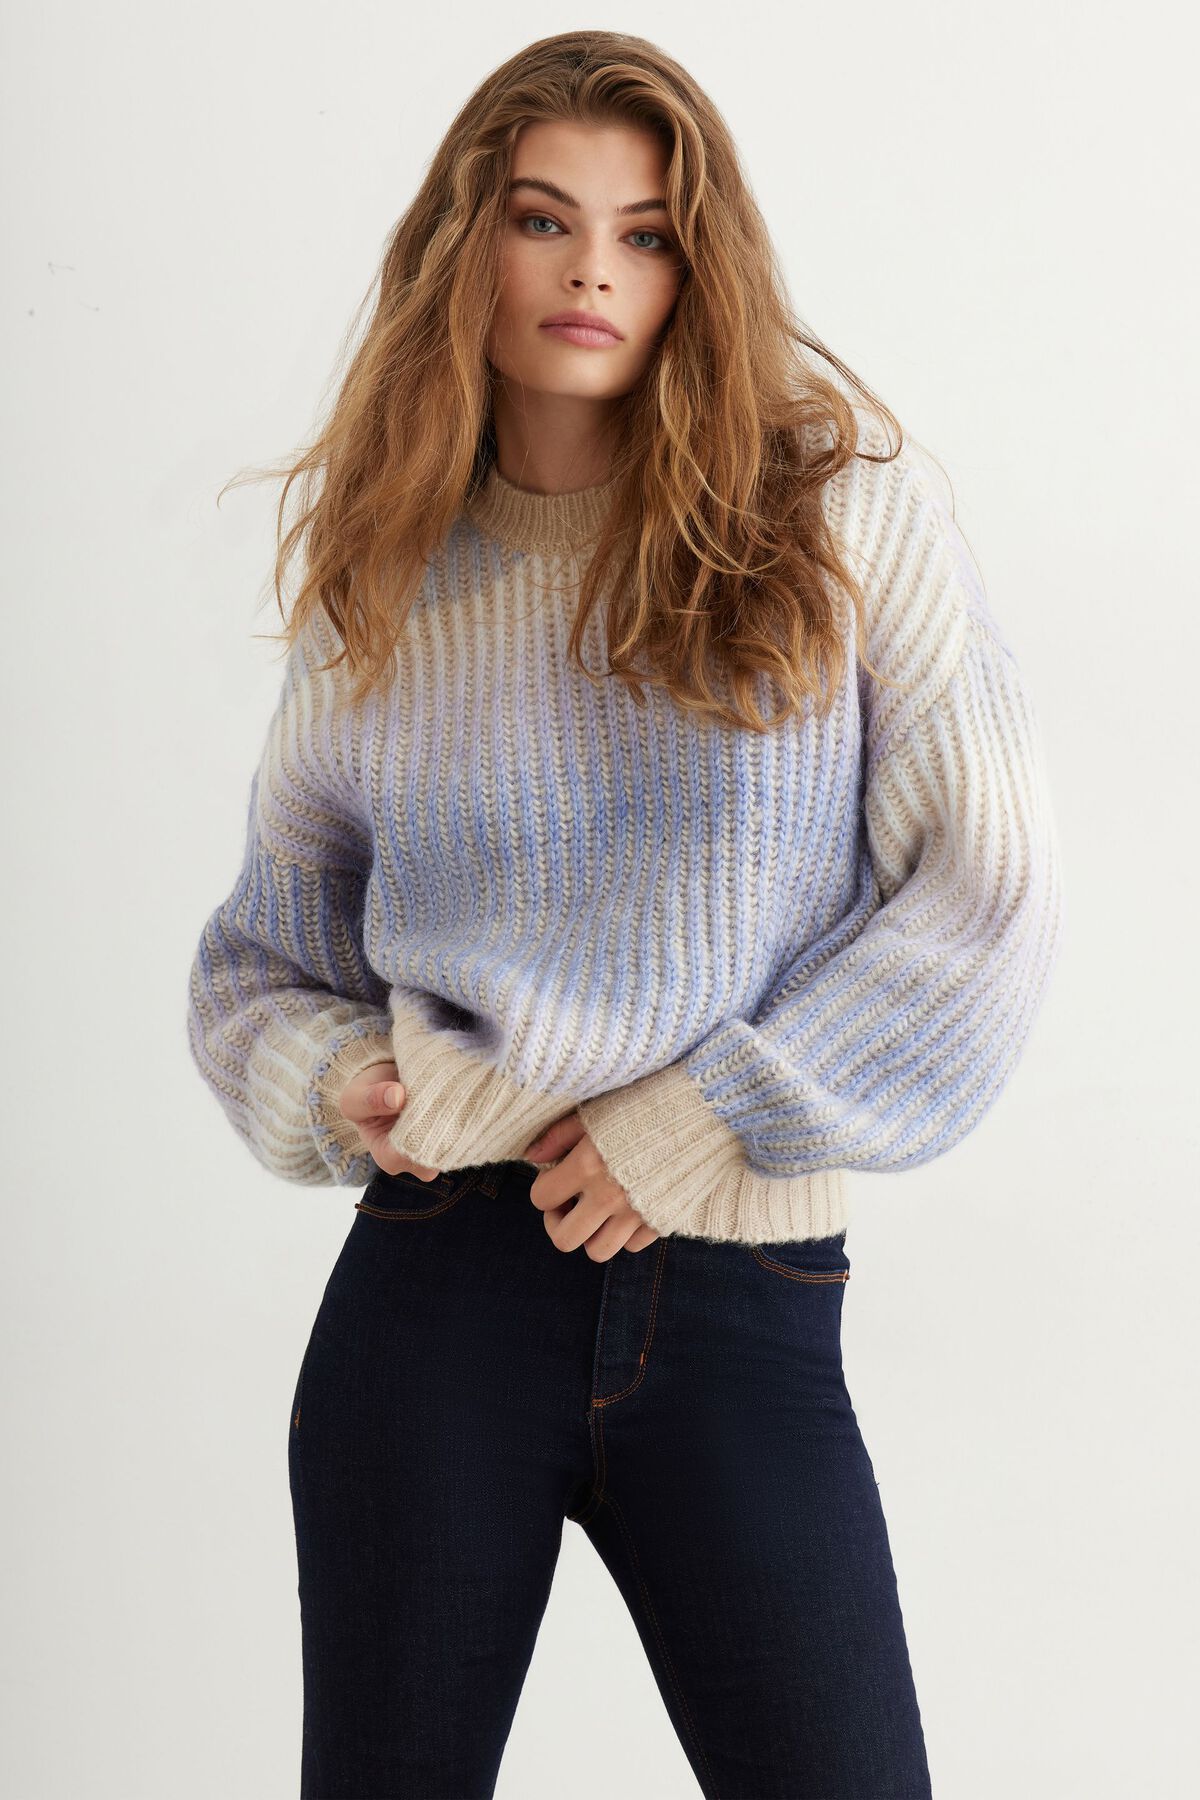 Dynamite Textured Ombre Sweater. 1